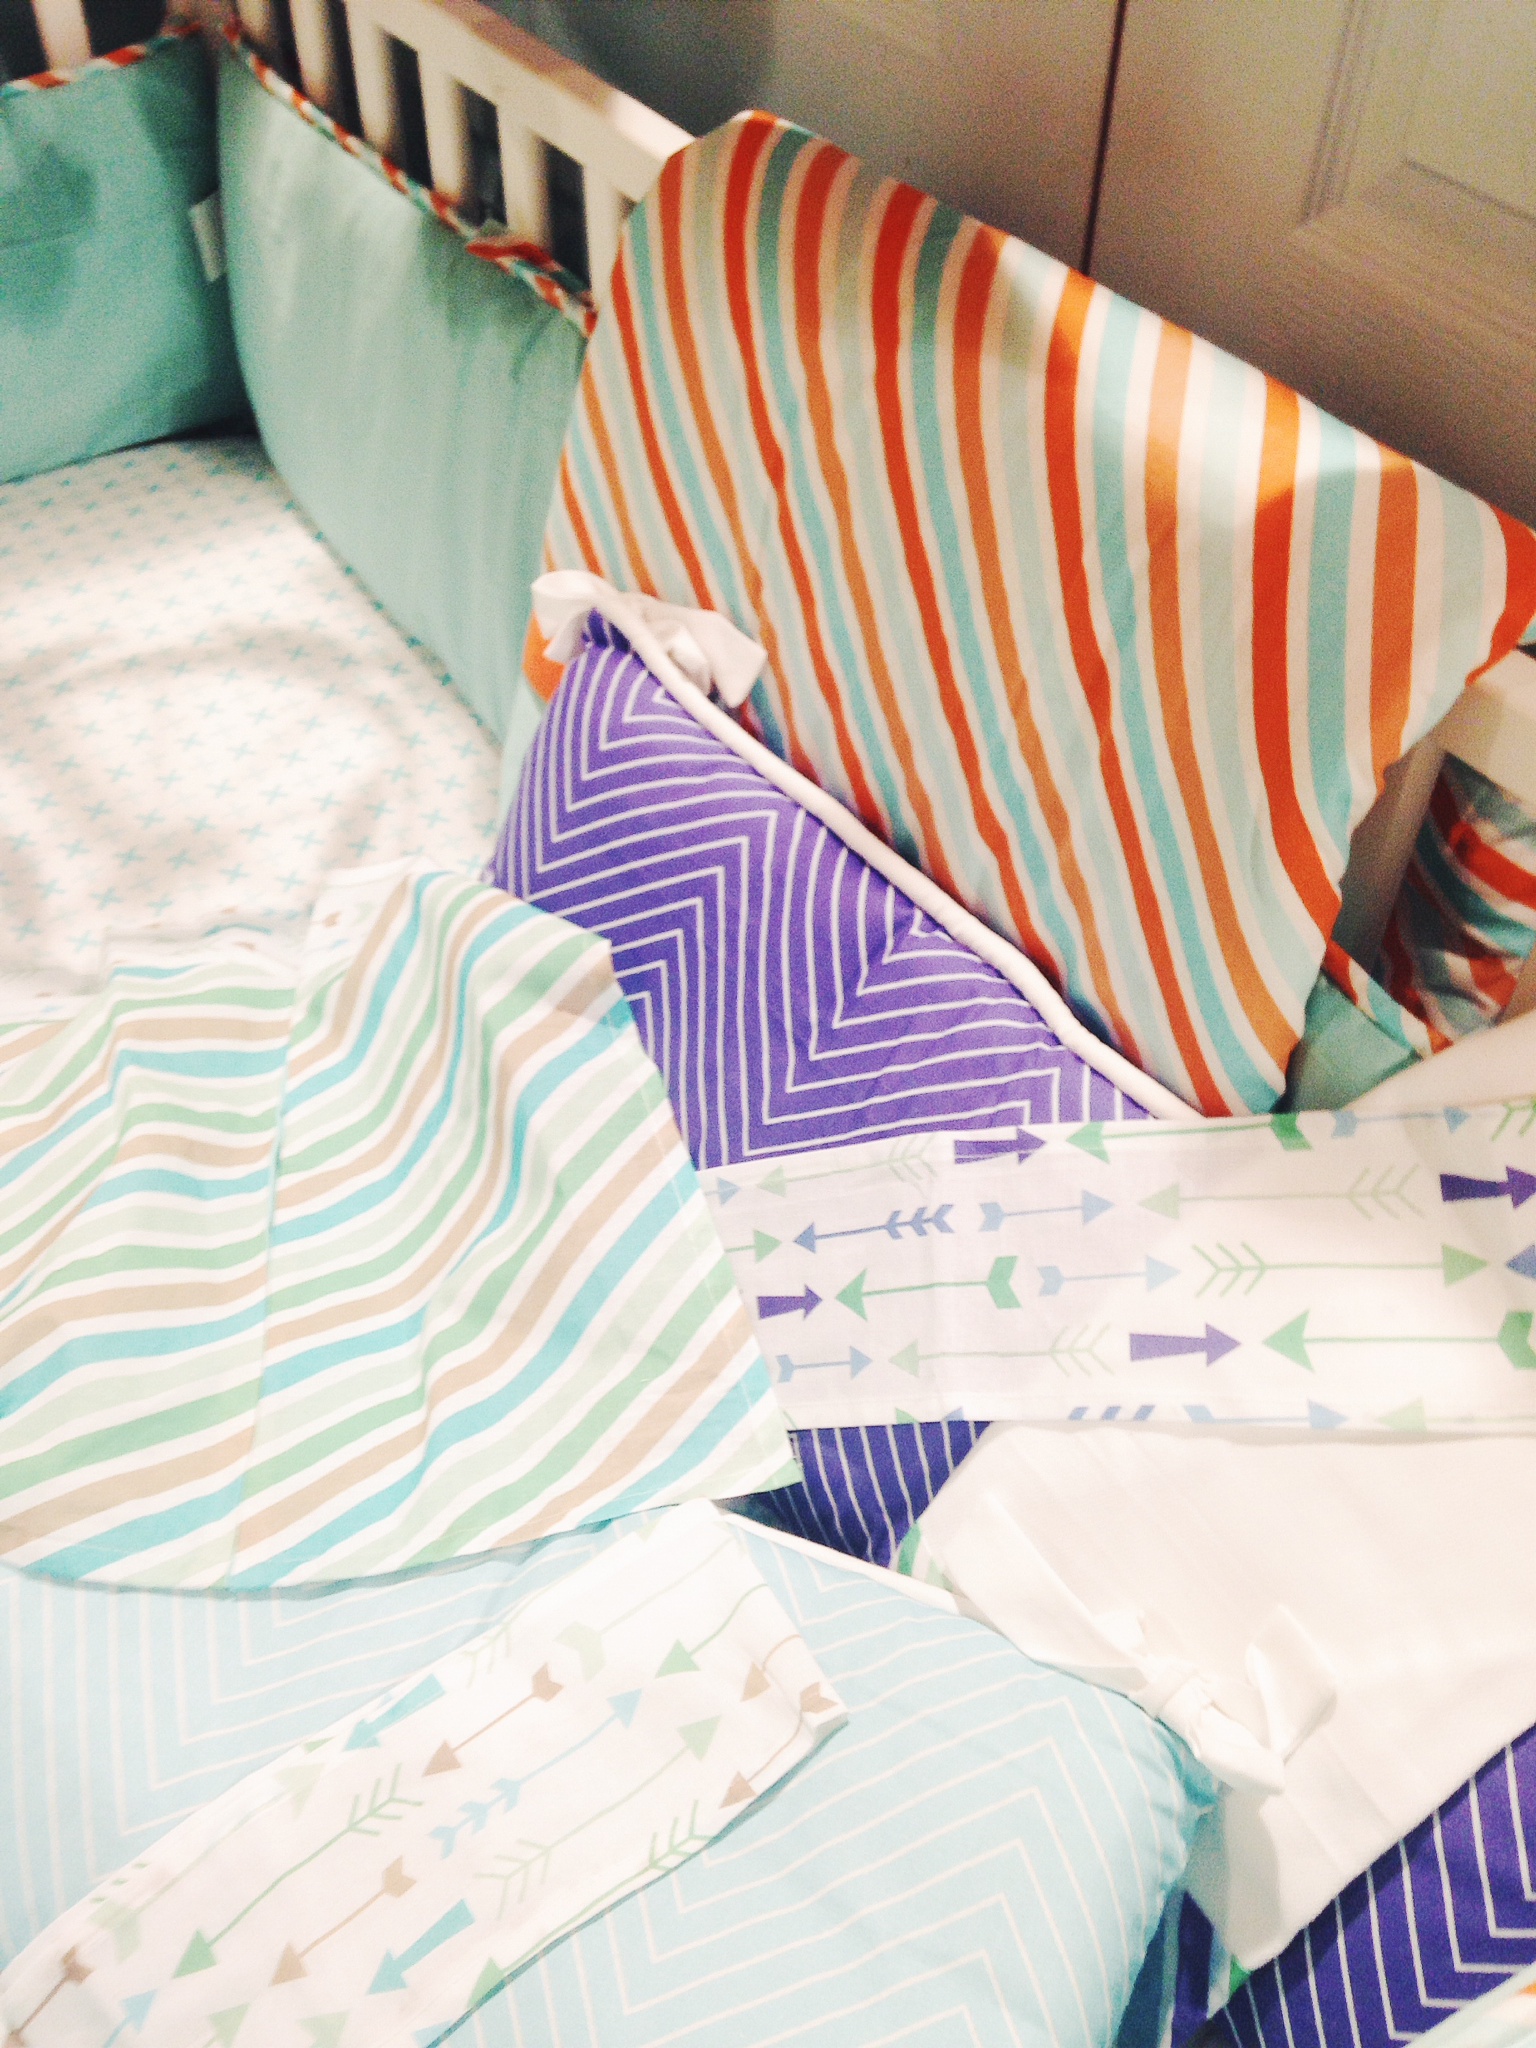 Bedding from New Arrivals ABC Kids Expo 2014